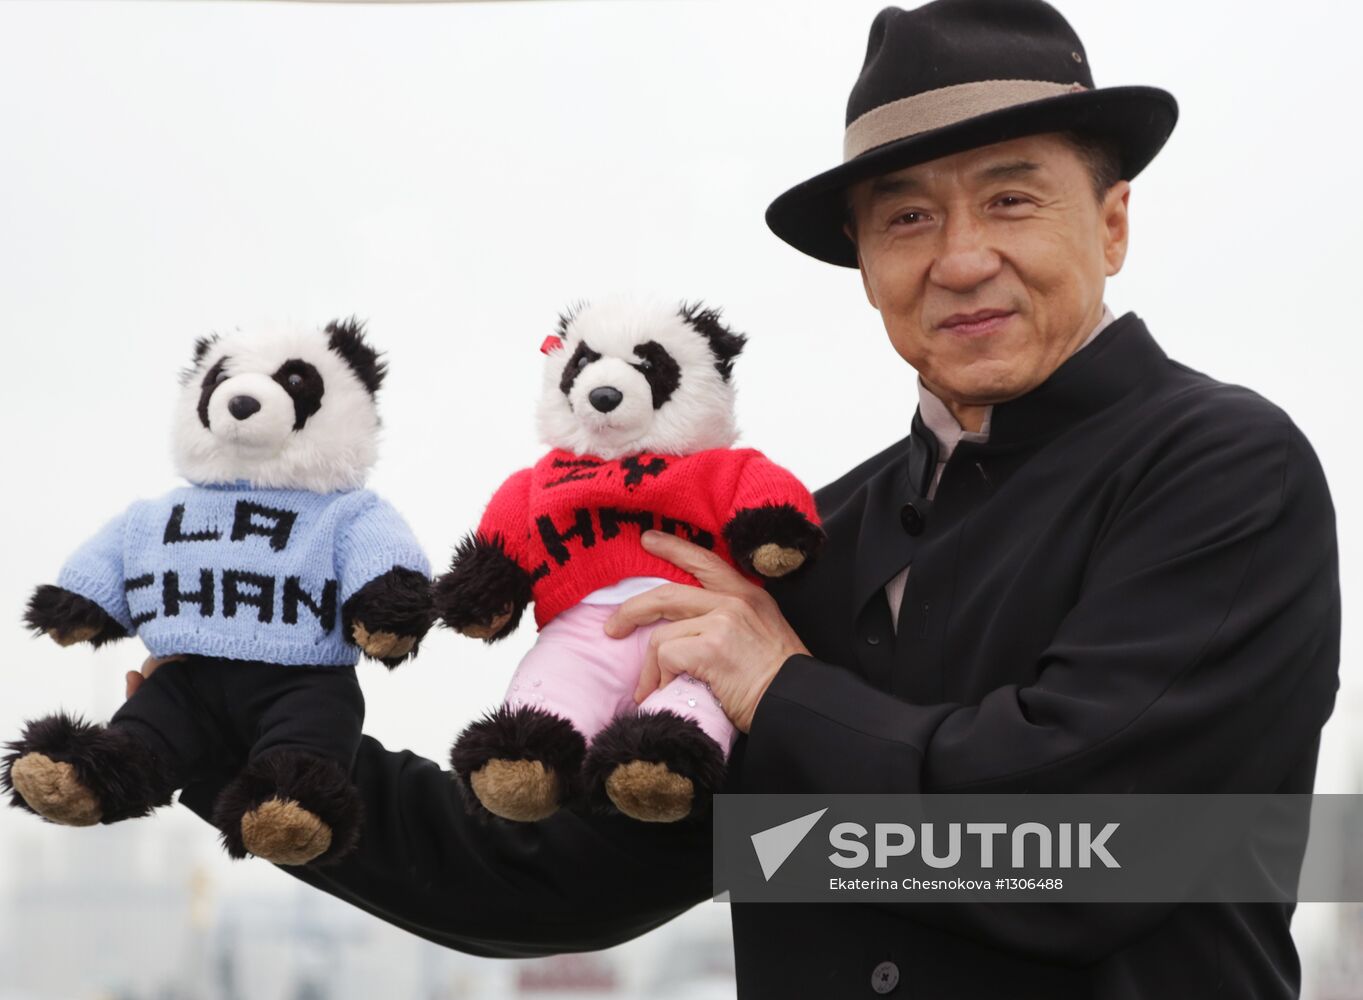 Jackie Chan photo call in Moscow